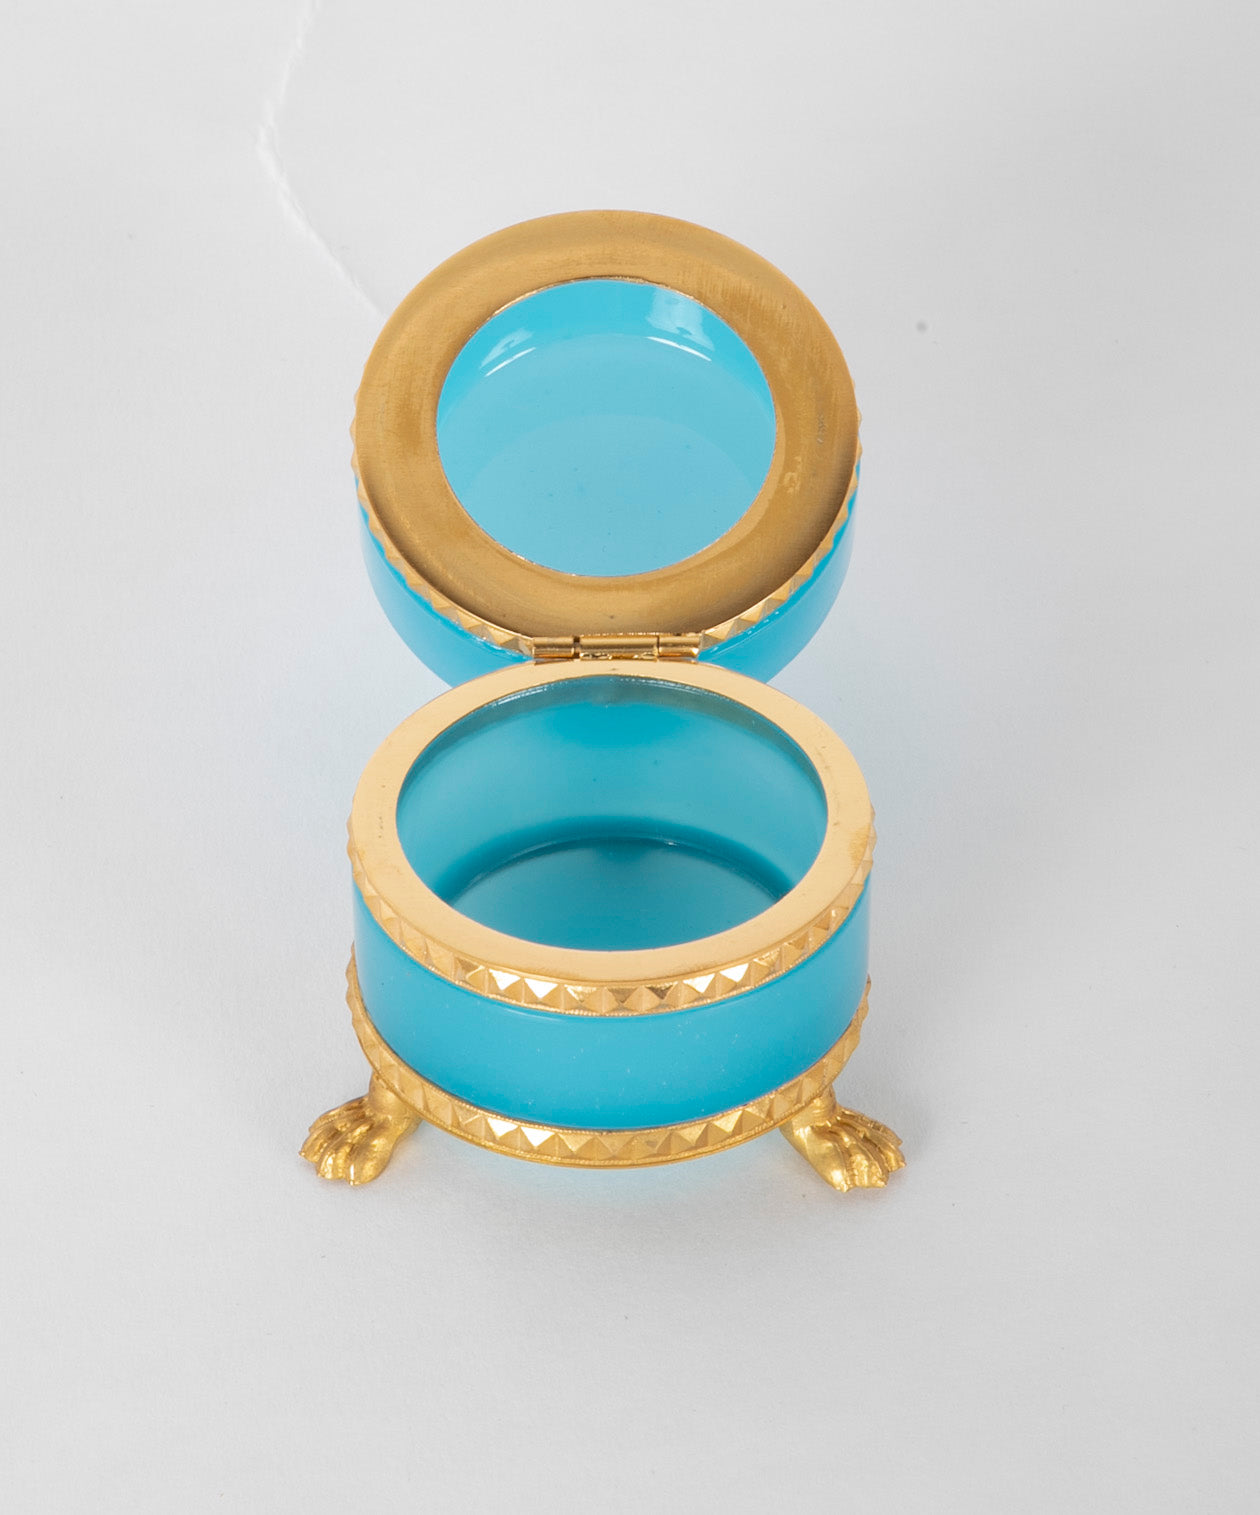 A Small Round Turquoise Opaline Glass Box